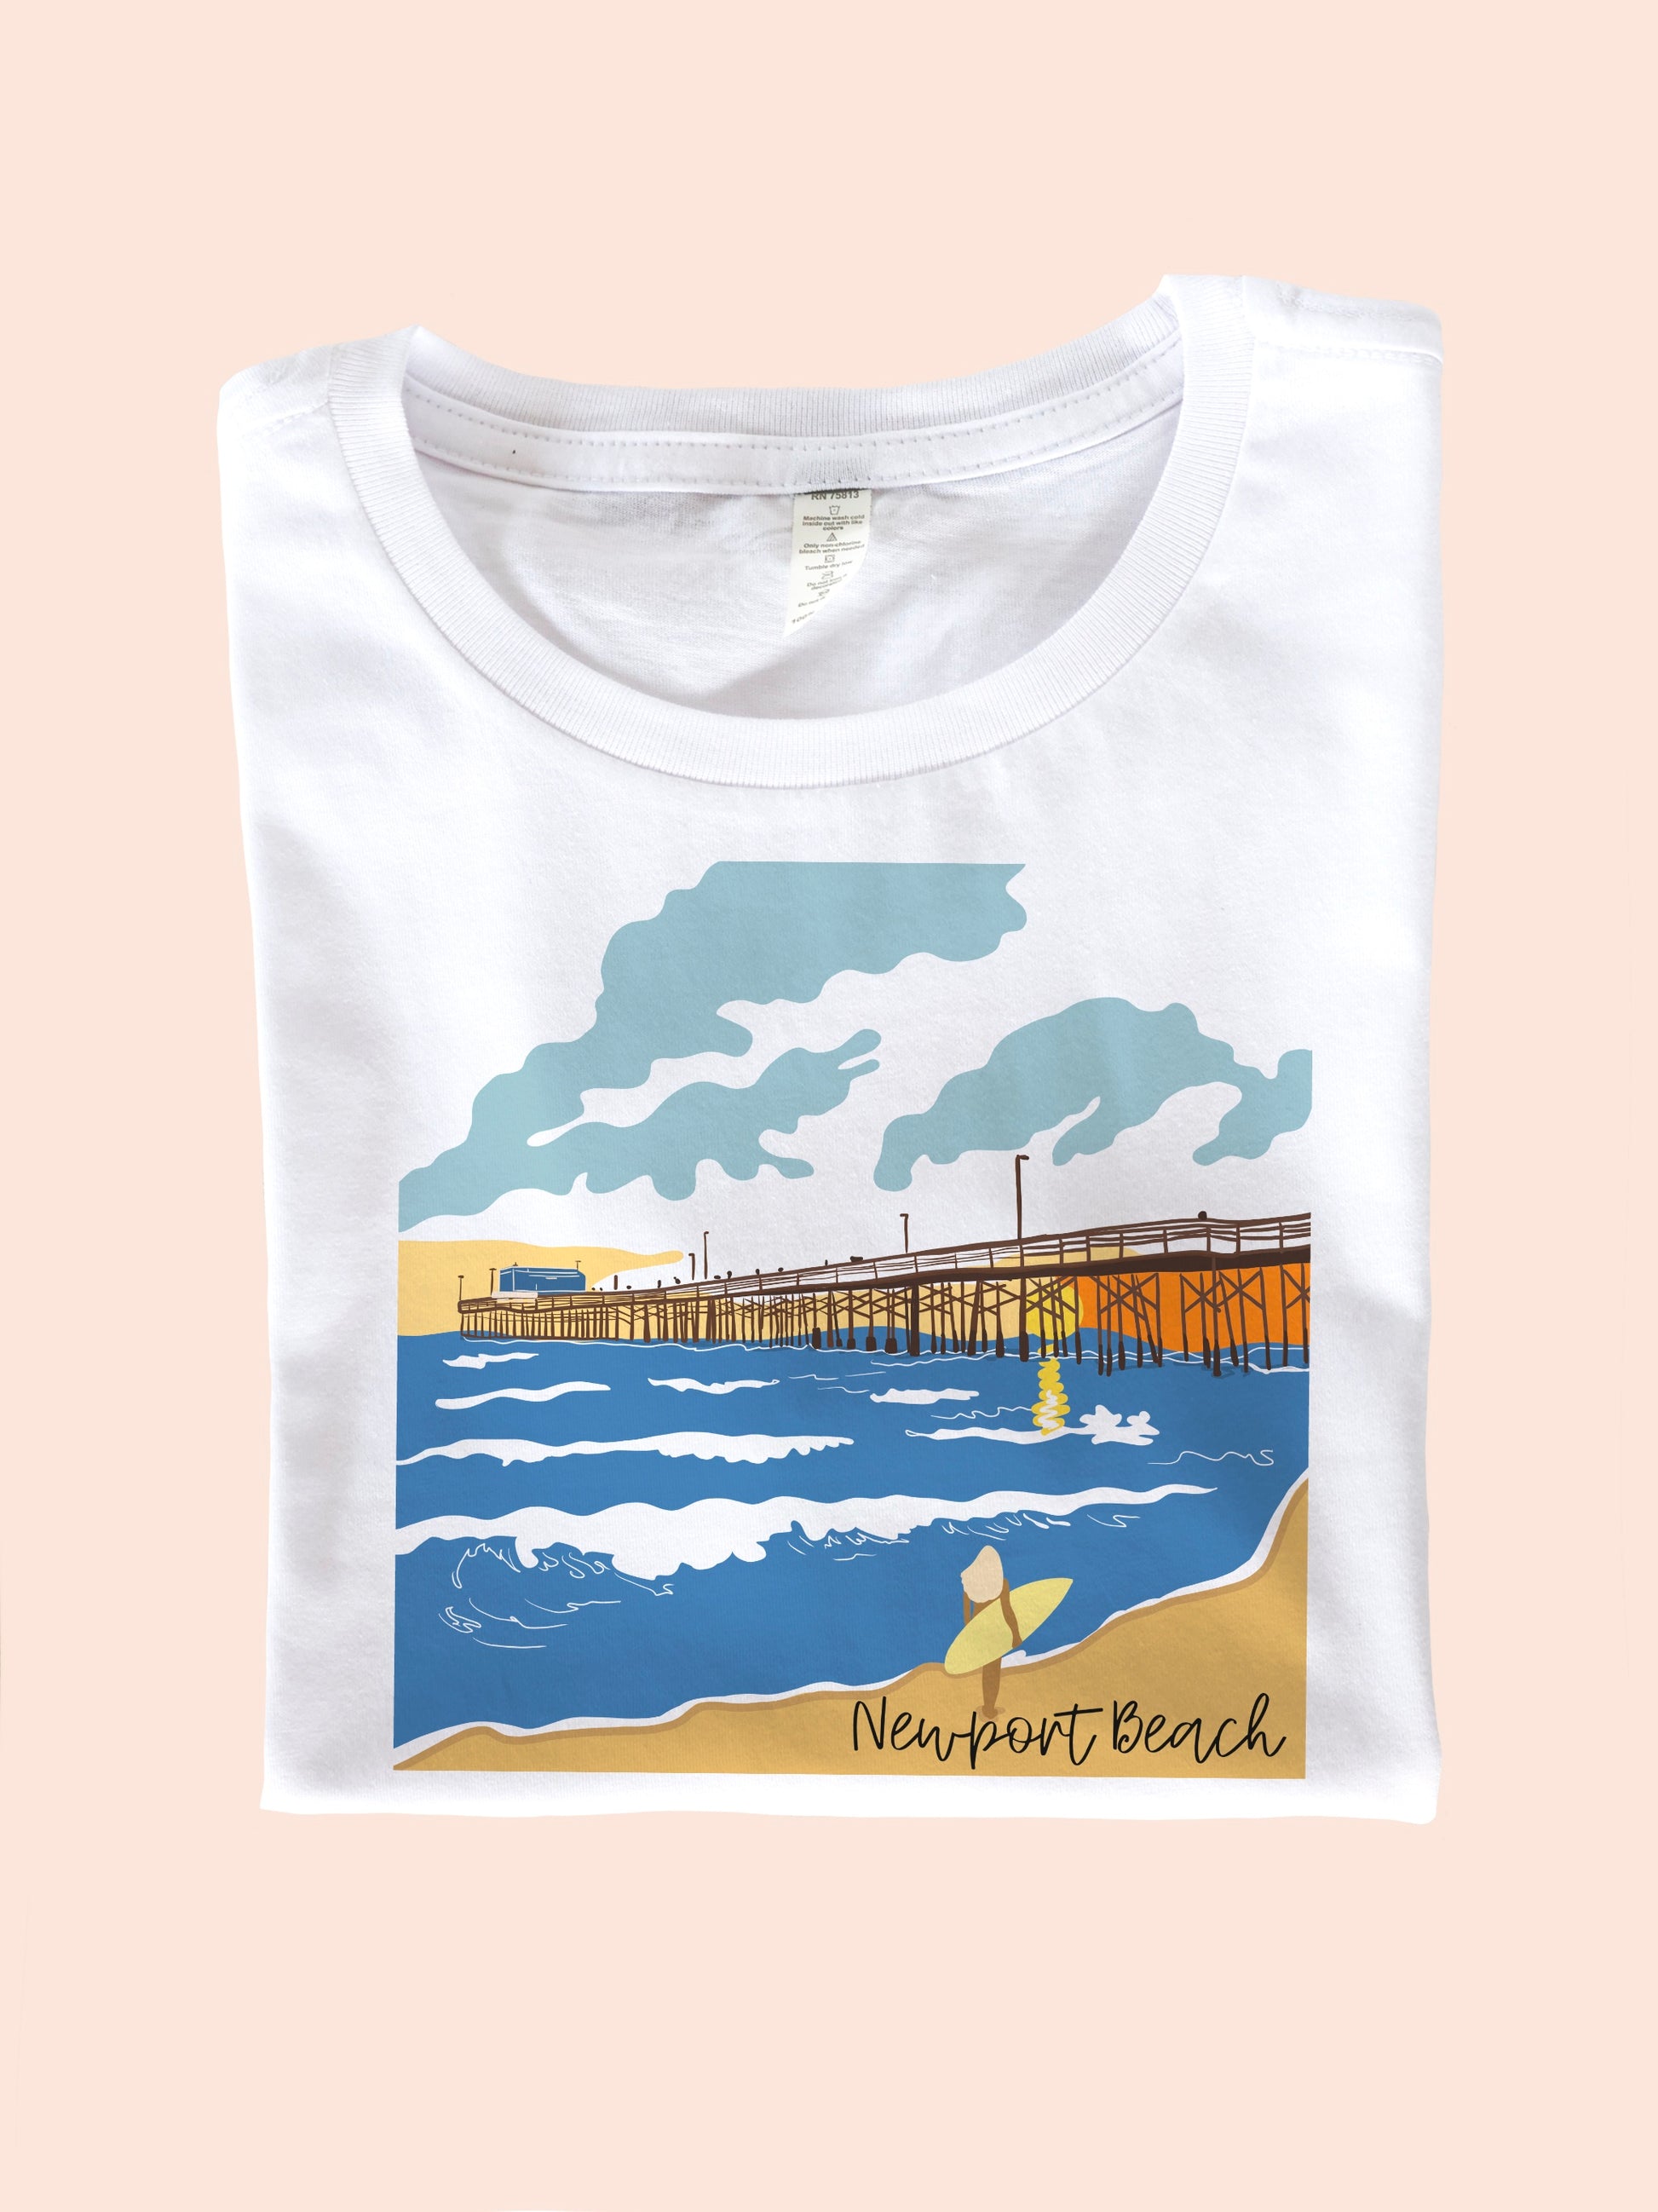 North Shore Girls graphic surf style t-shirt for women. Newport Beach illustration by a local artist Nadia Watts